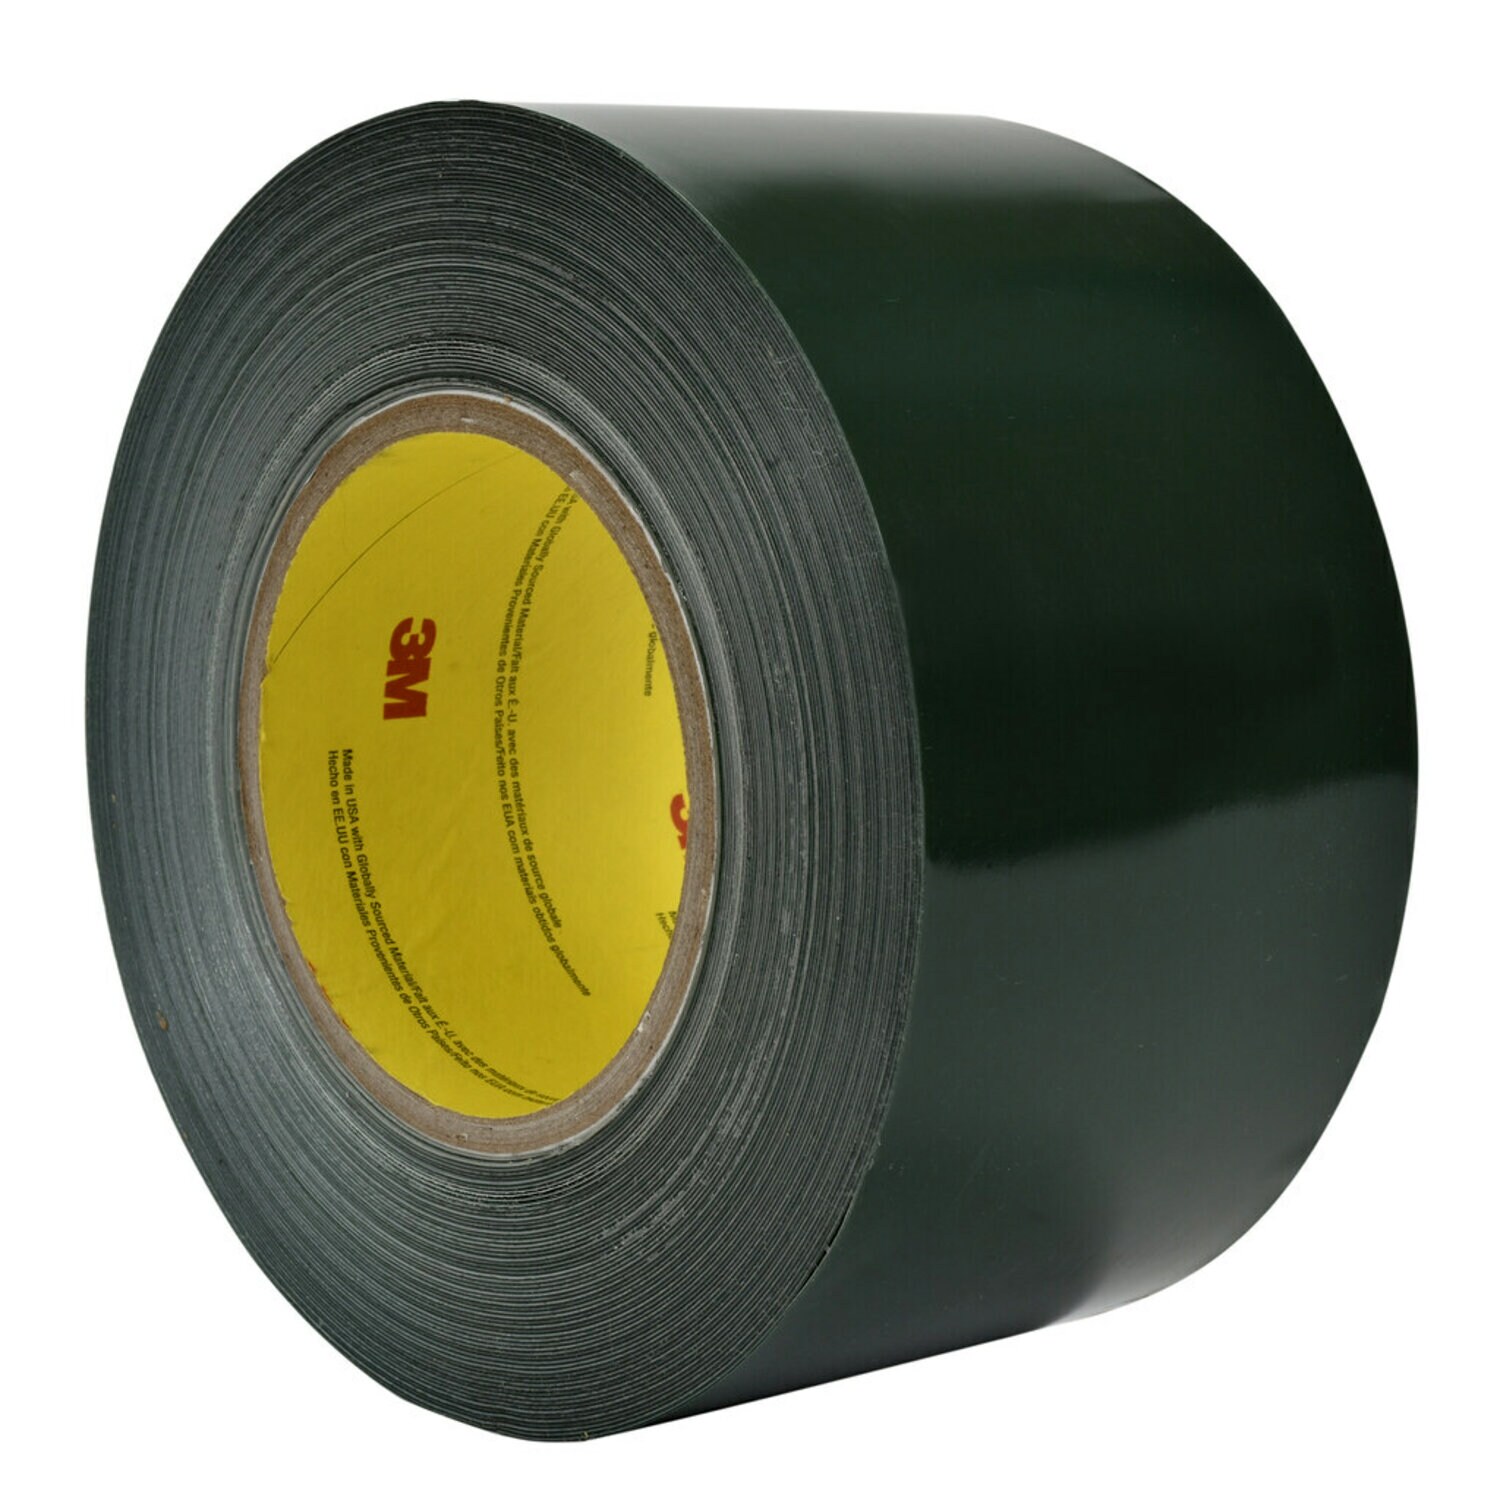 7010375561 - 3M Sealing and Holding Tape 8069, 1 in x 25 yd, 36 rolls per case,
Solid Liner